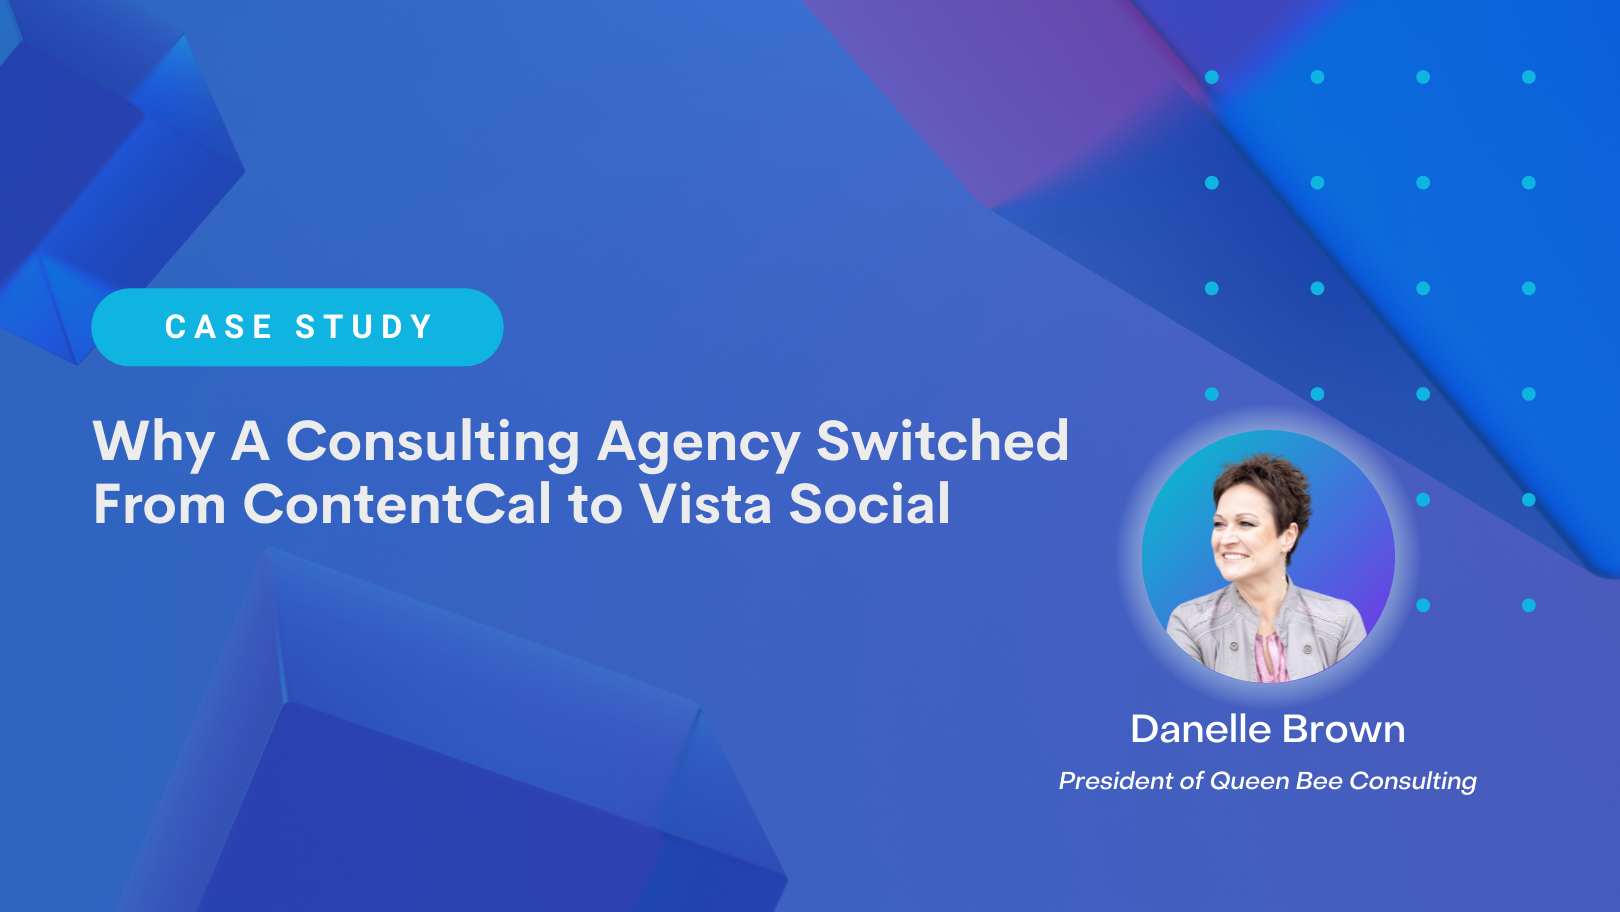 Why A Consulting Agency Switched From ContentCal to Vista Social